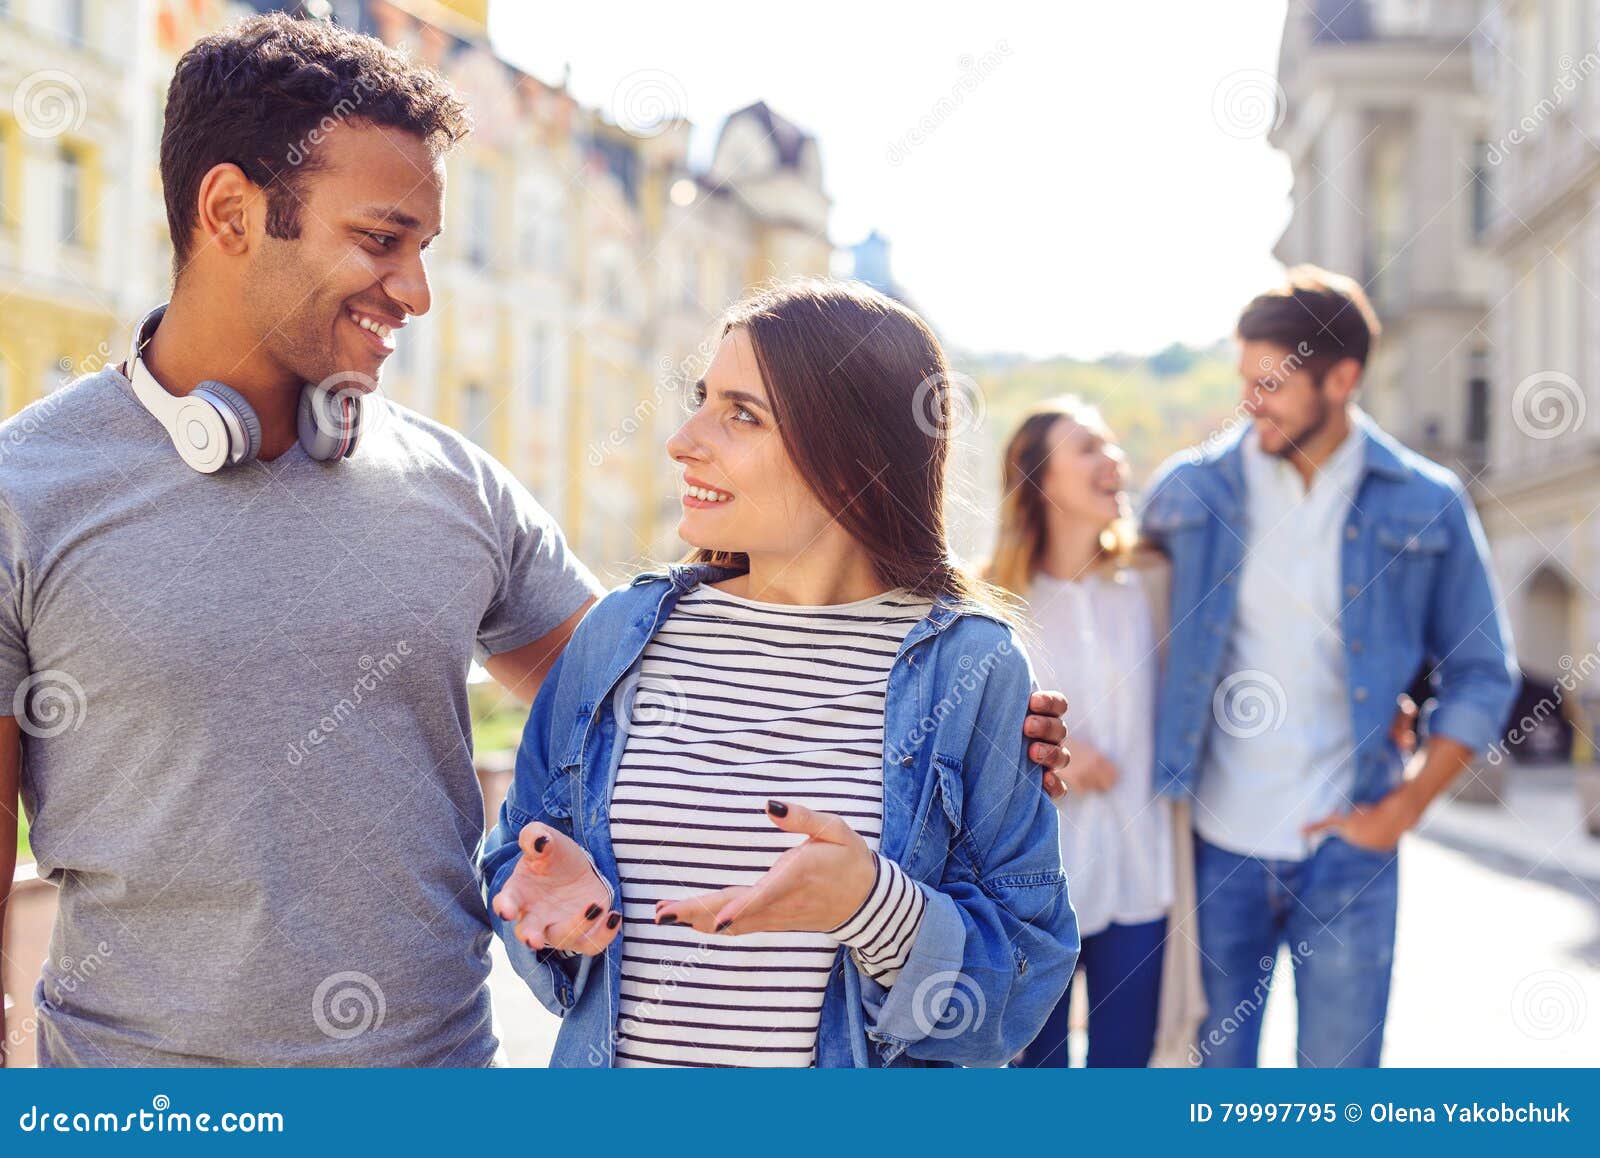 College Students Hanging Out On Campus Stock Image - Image of happiness